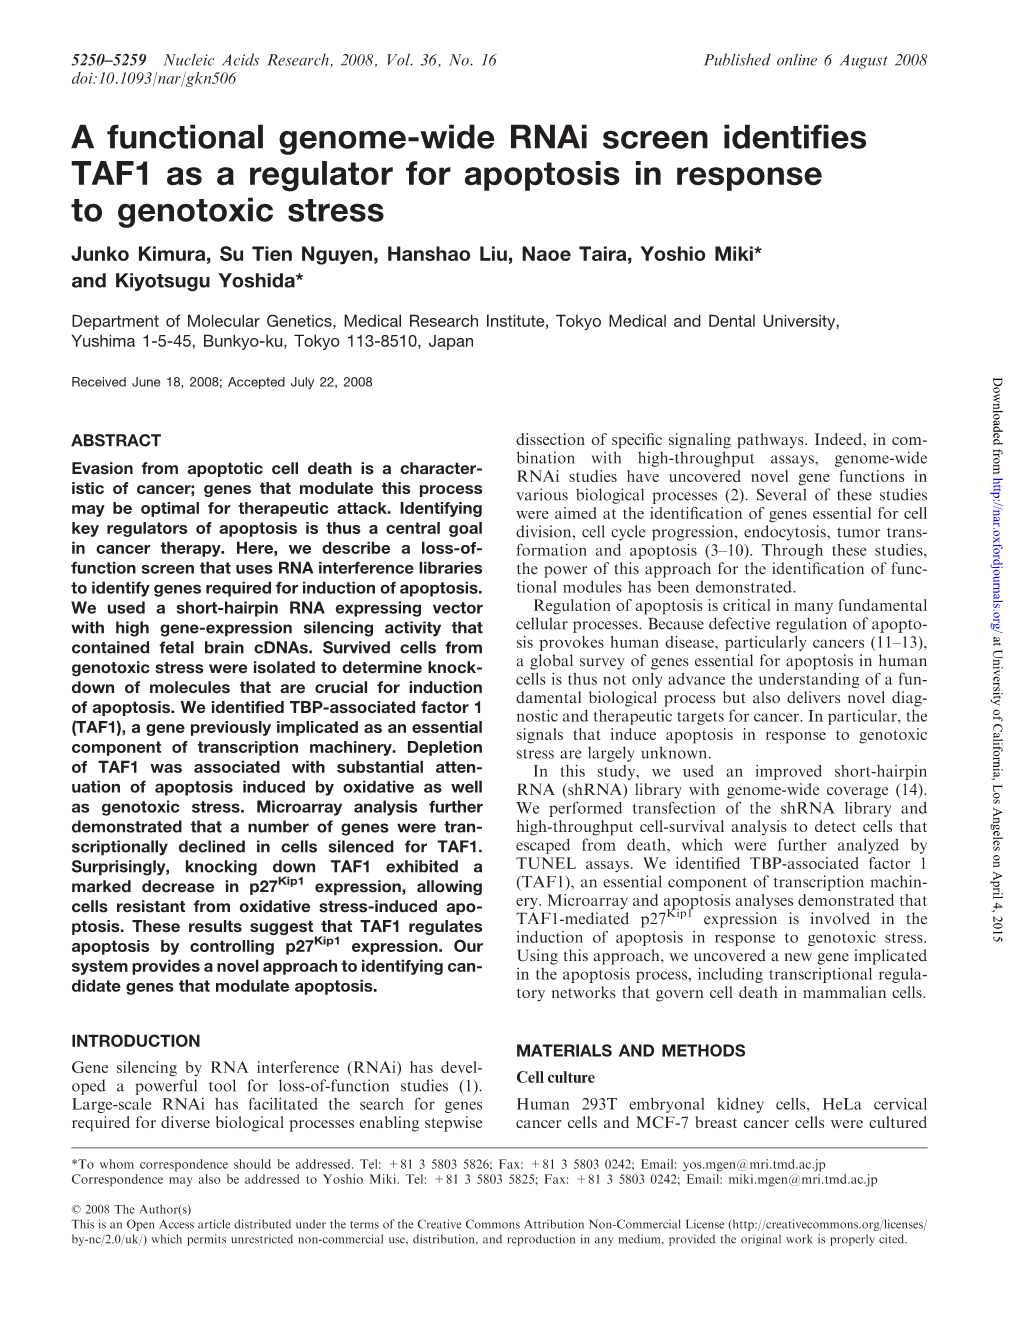 A Functional Genome-Wide Rnai Screen Identifies TAF1 As A